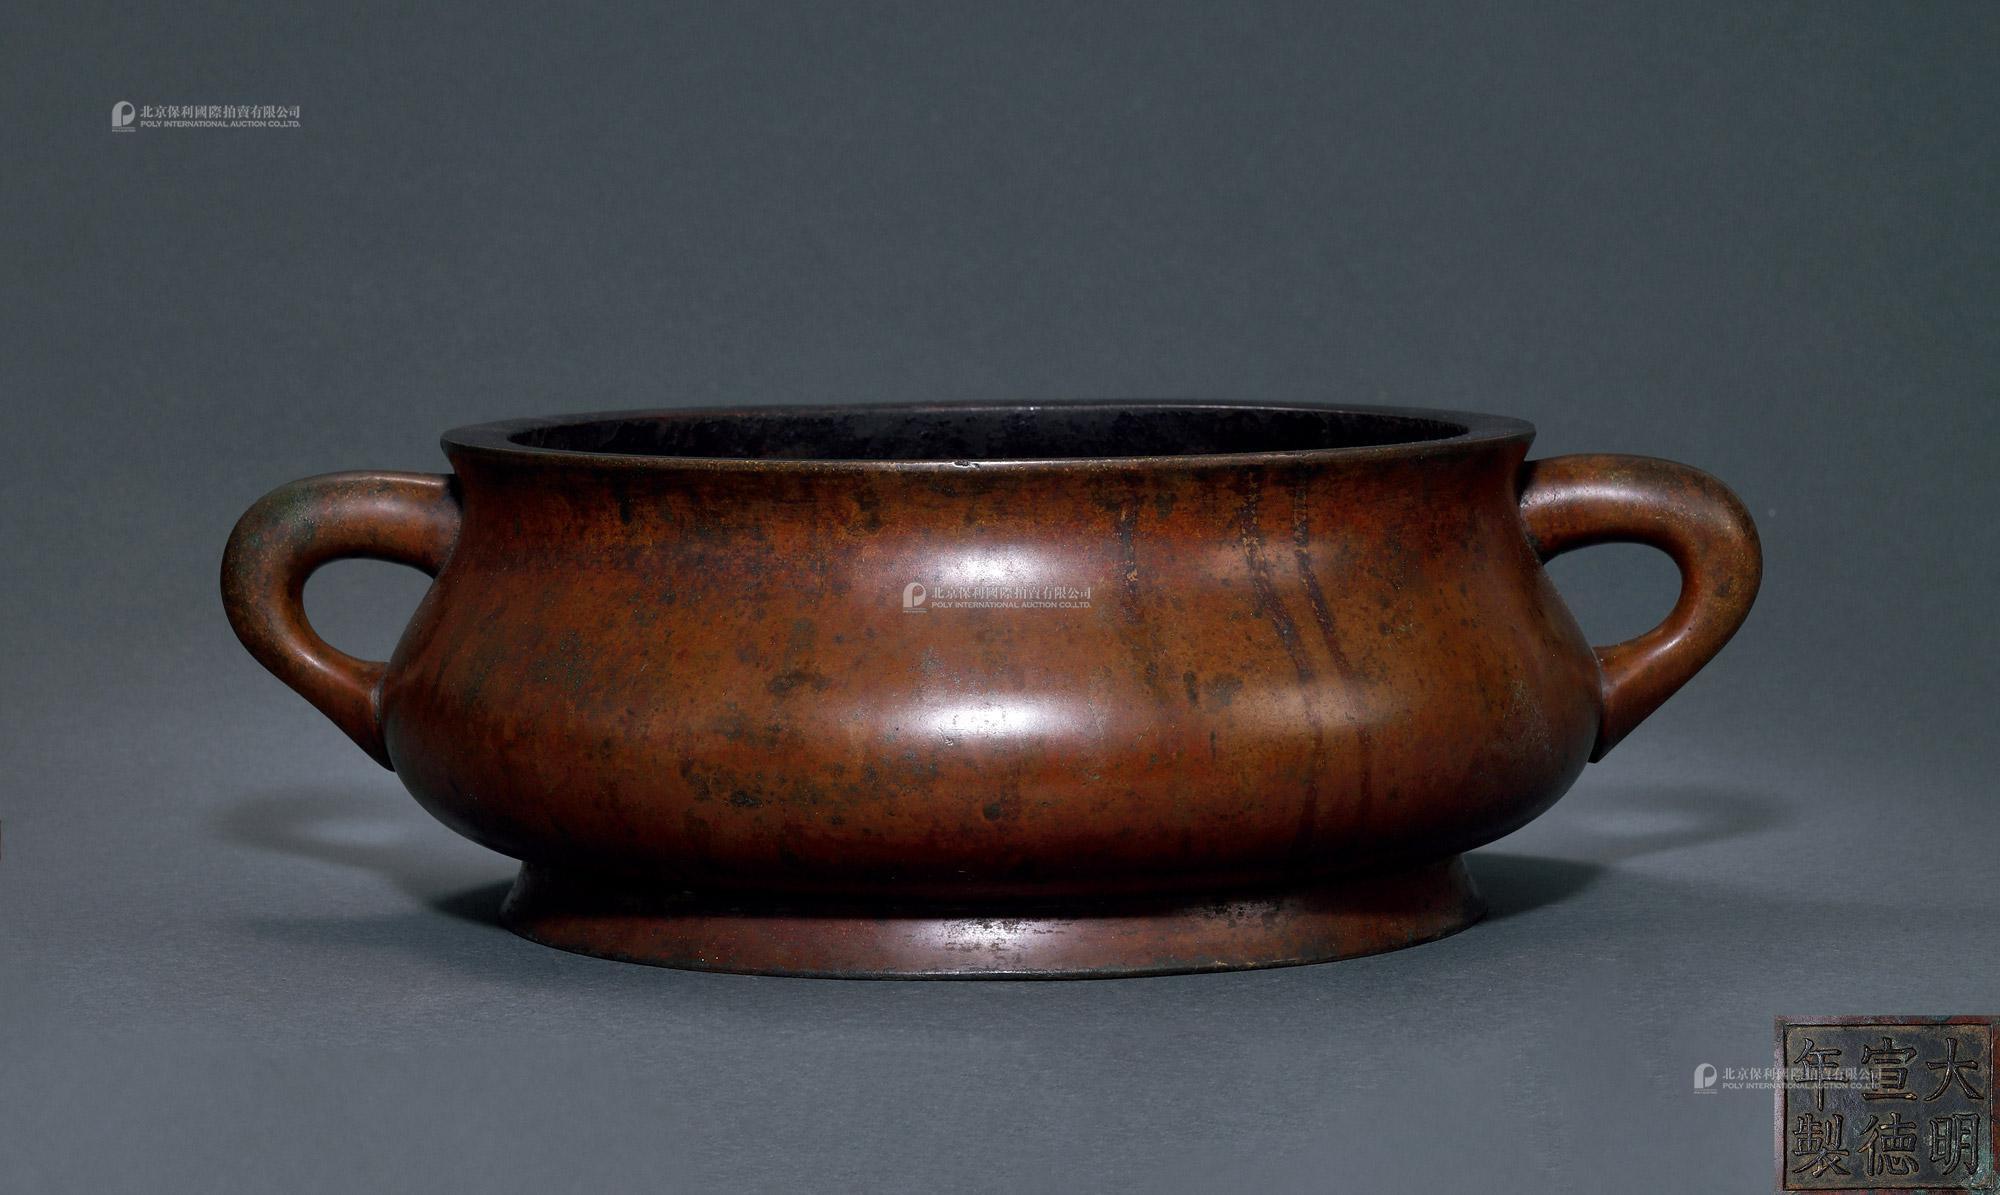 A LARGE BRONZE INCENSE BURNER WITH EARS